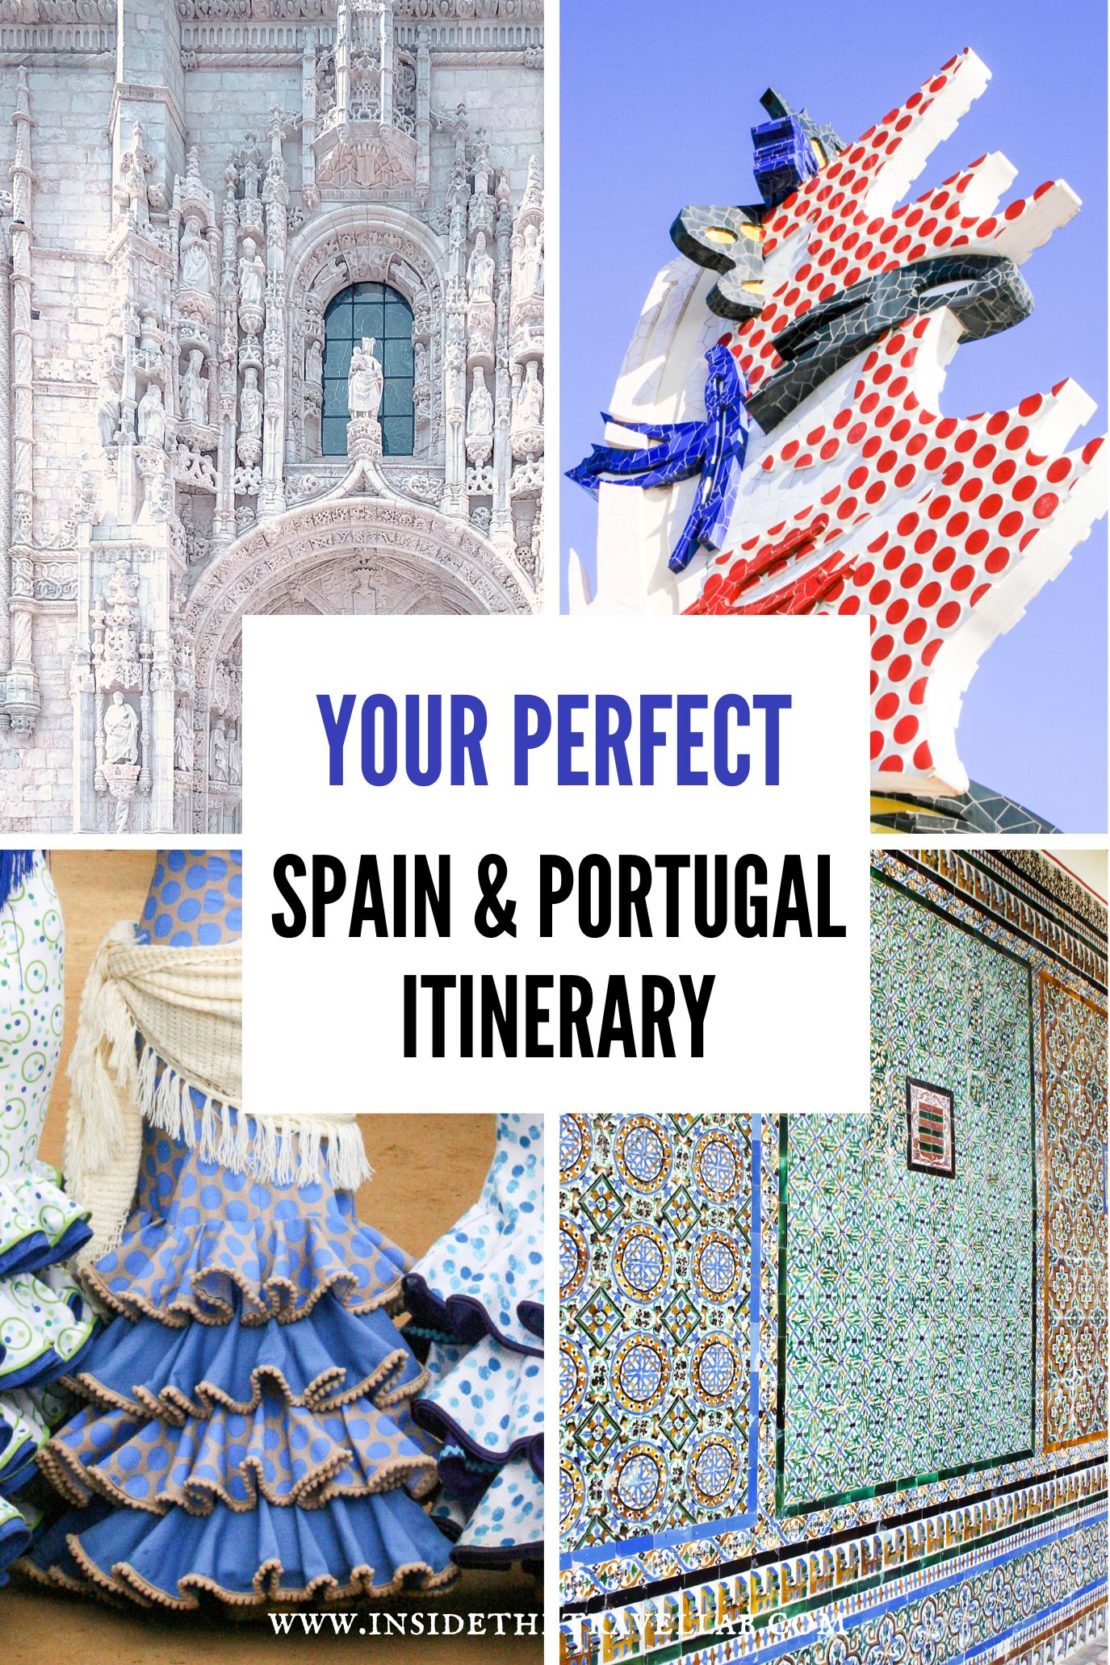 Spain and Portugal itinerary planner cover image for Pinterest